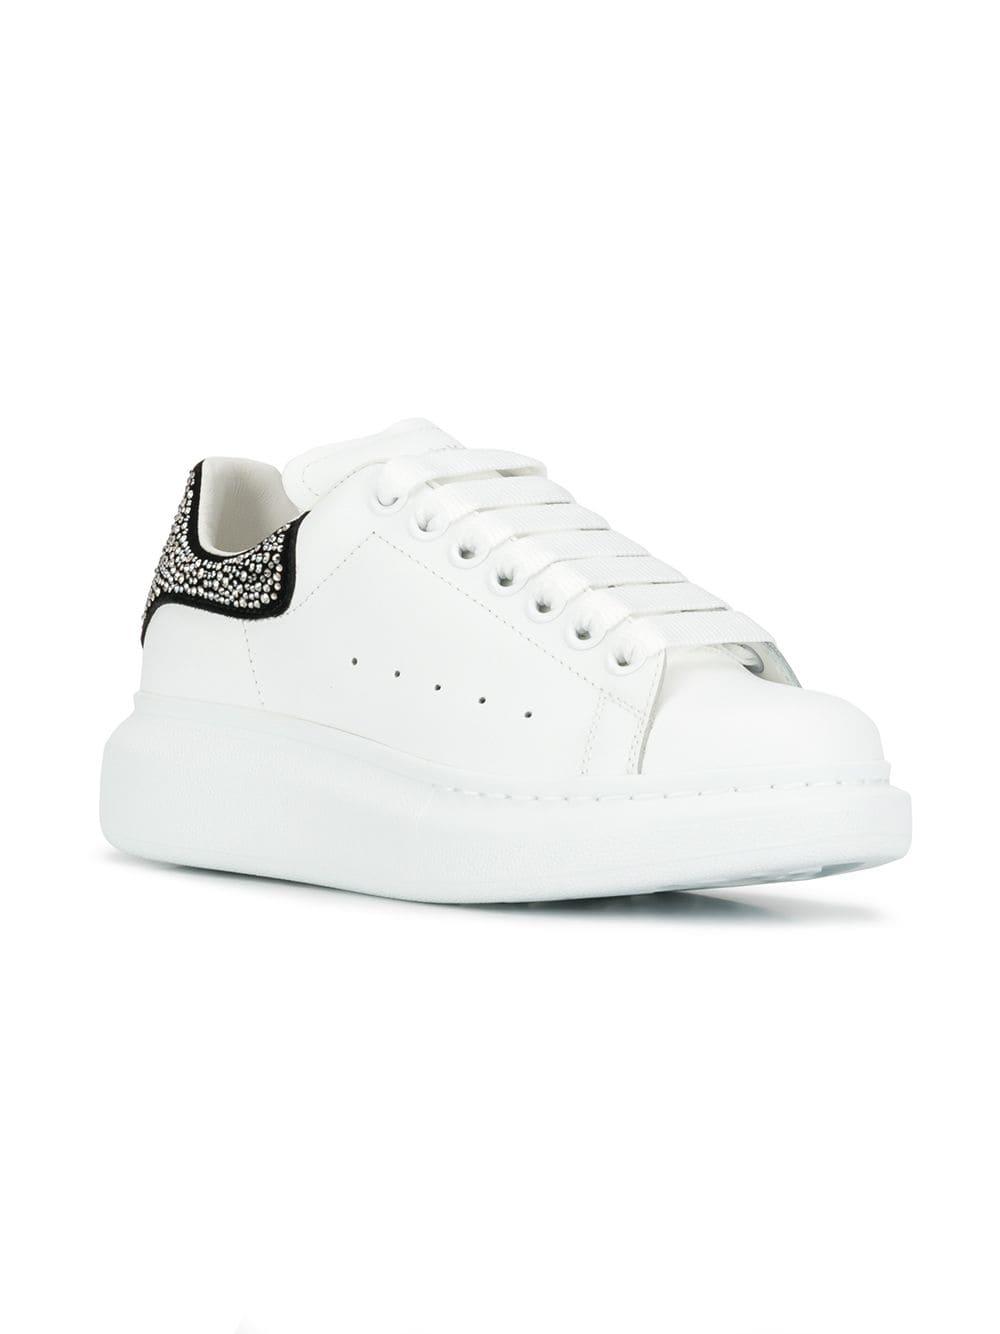 Alexander McQueen Leather Embellished Oversized Sole Sneakers in White ...